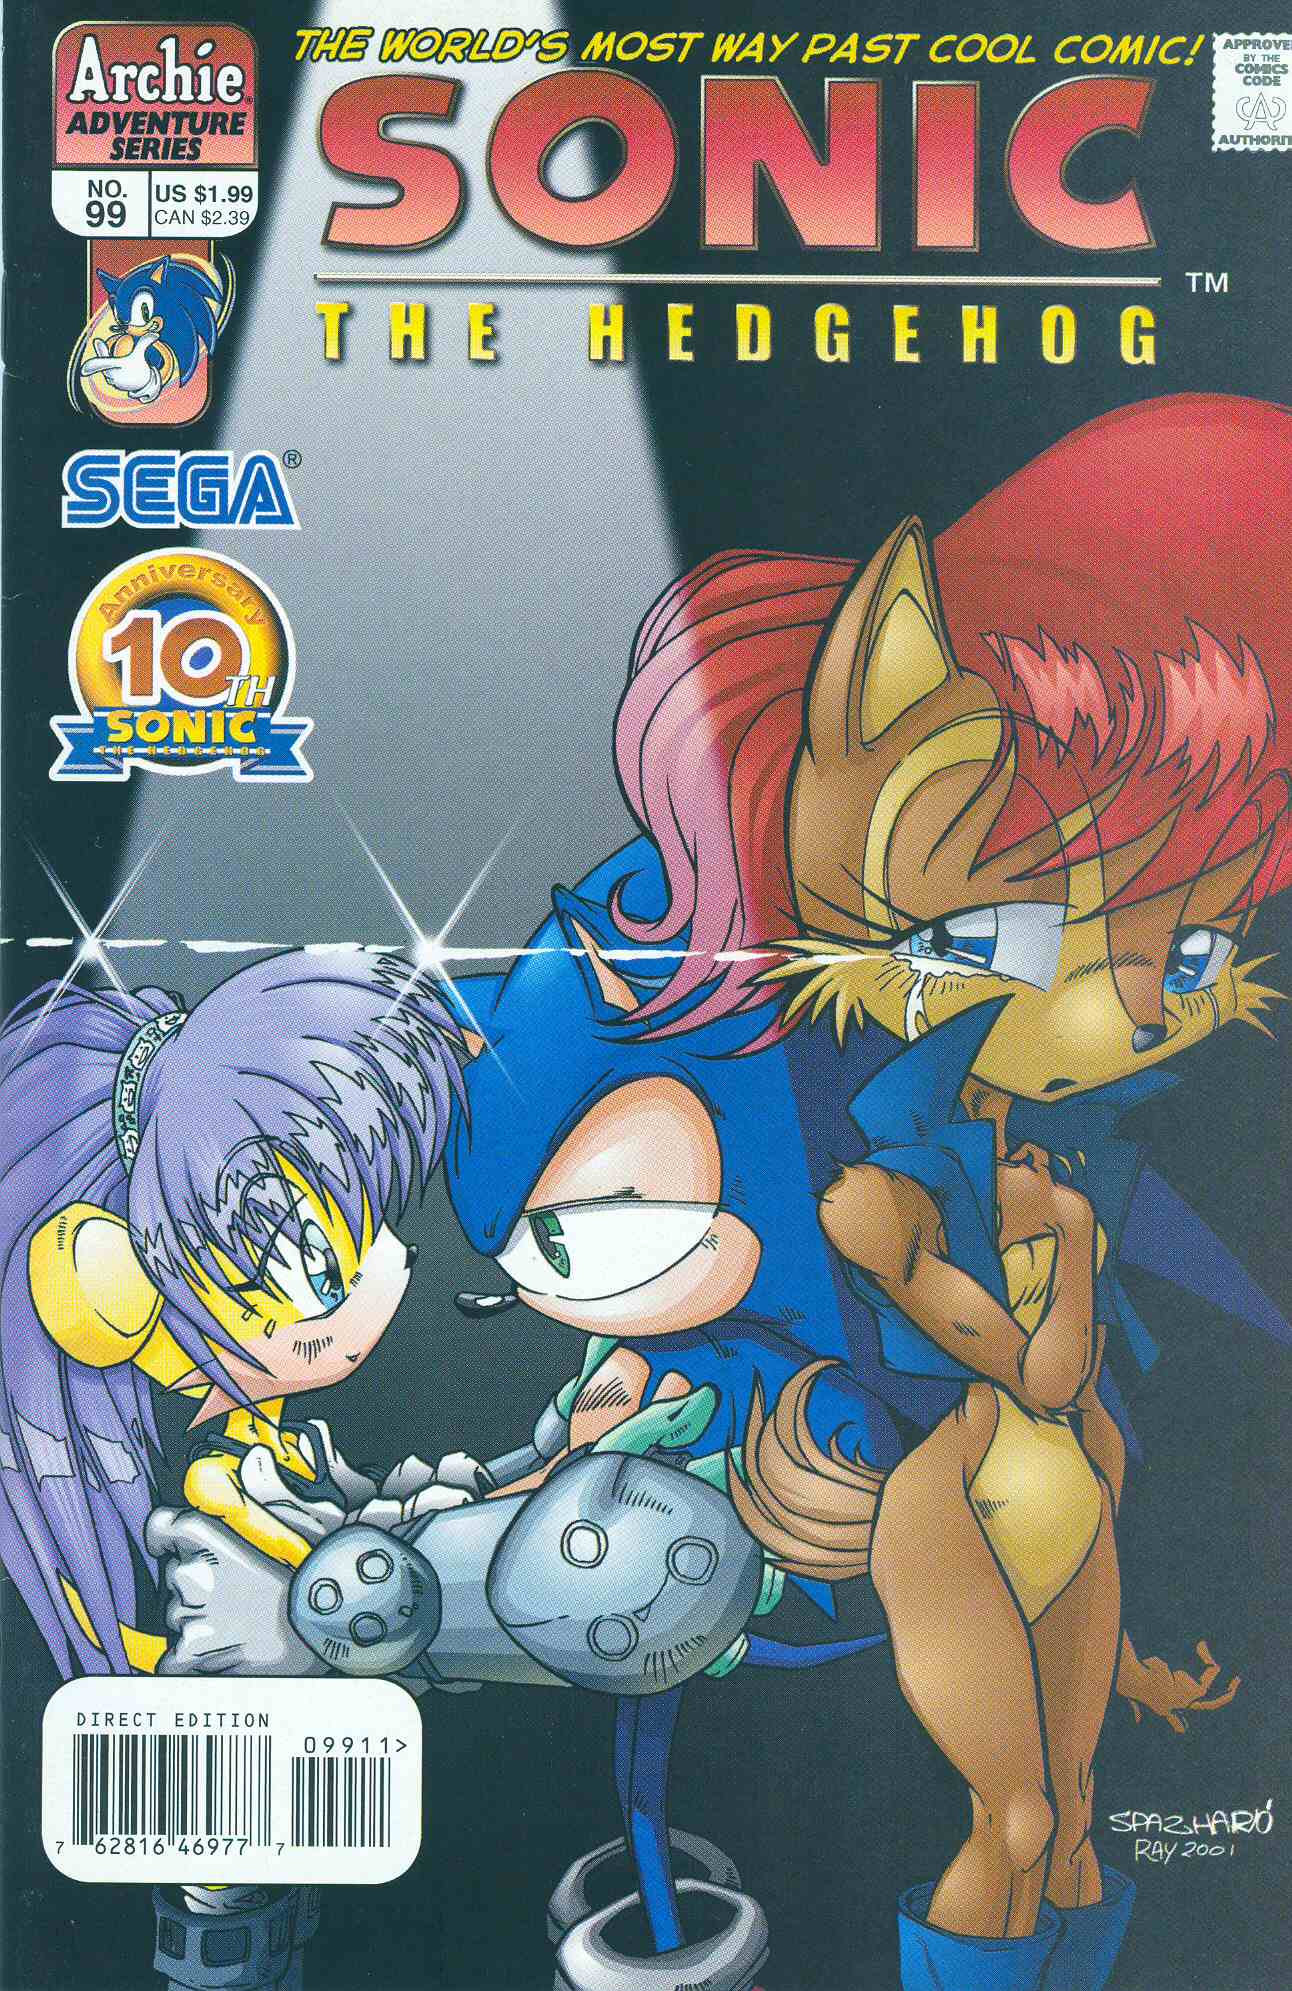 Sonic - Archie Adventure Series August 2001 Cover Page